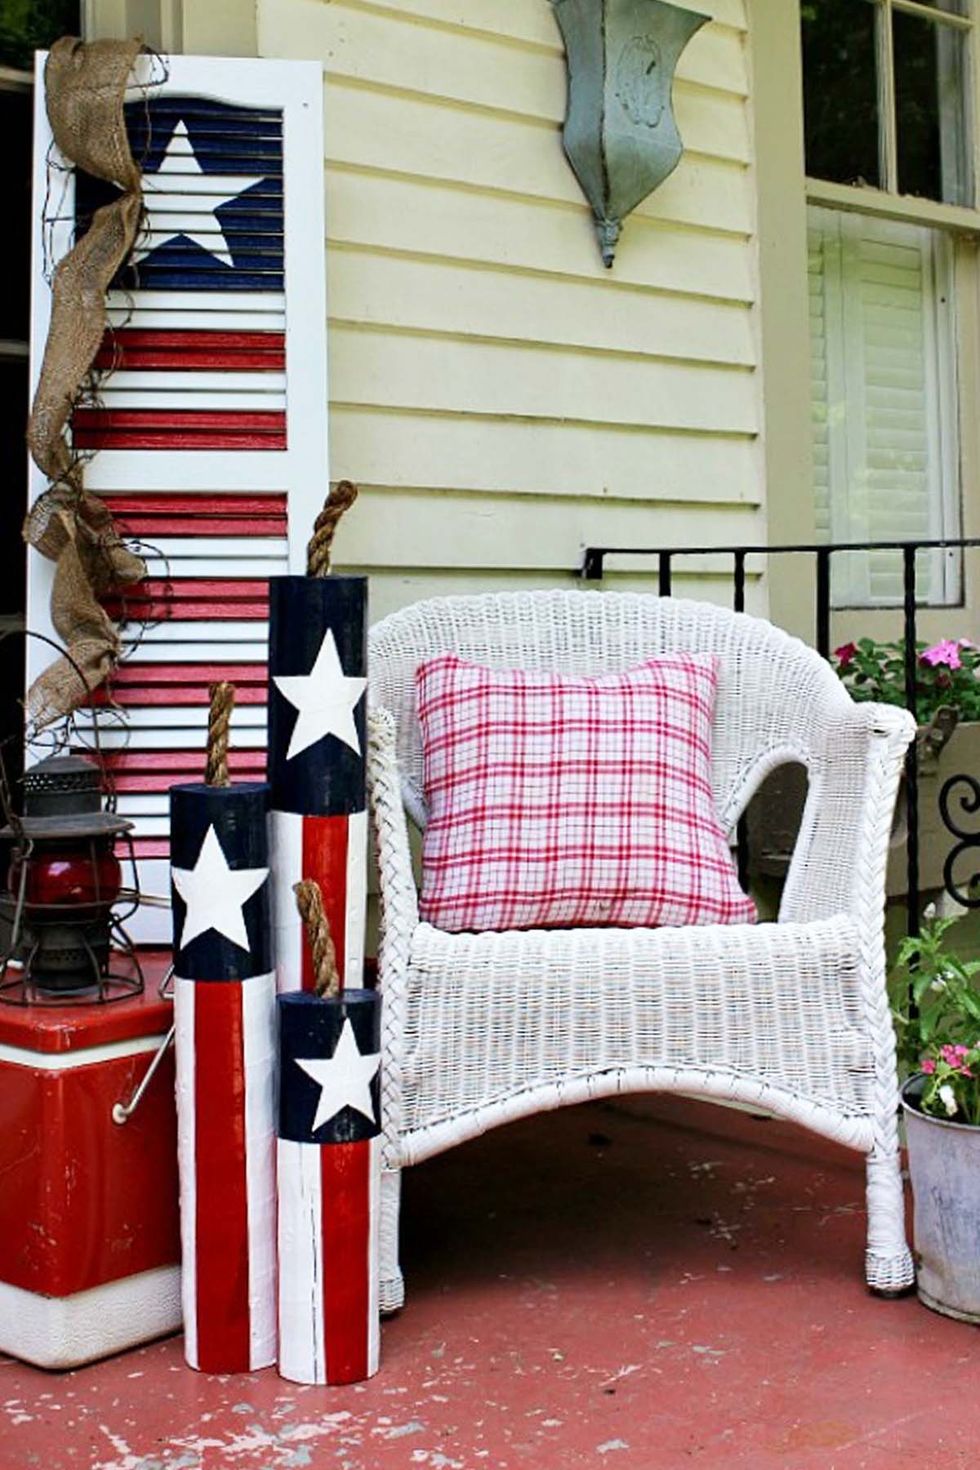 DIY 4th of July Wooden Firecrackers - Best DIY 4th of July Decorations - The NavagePatch.com